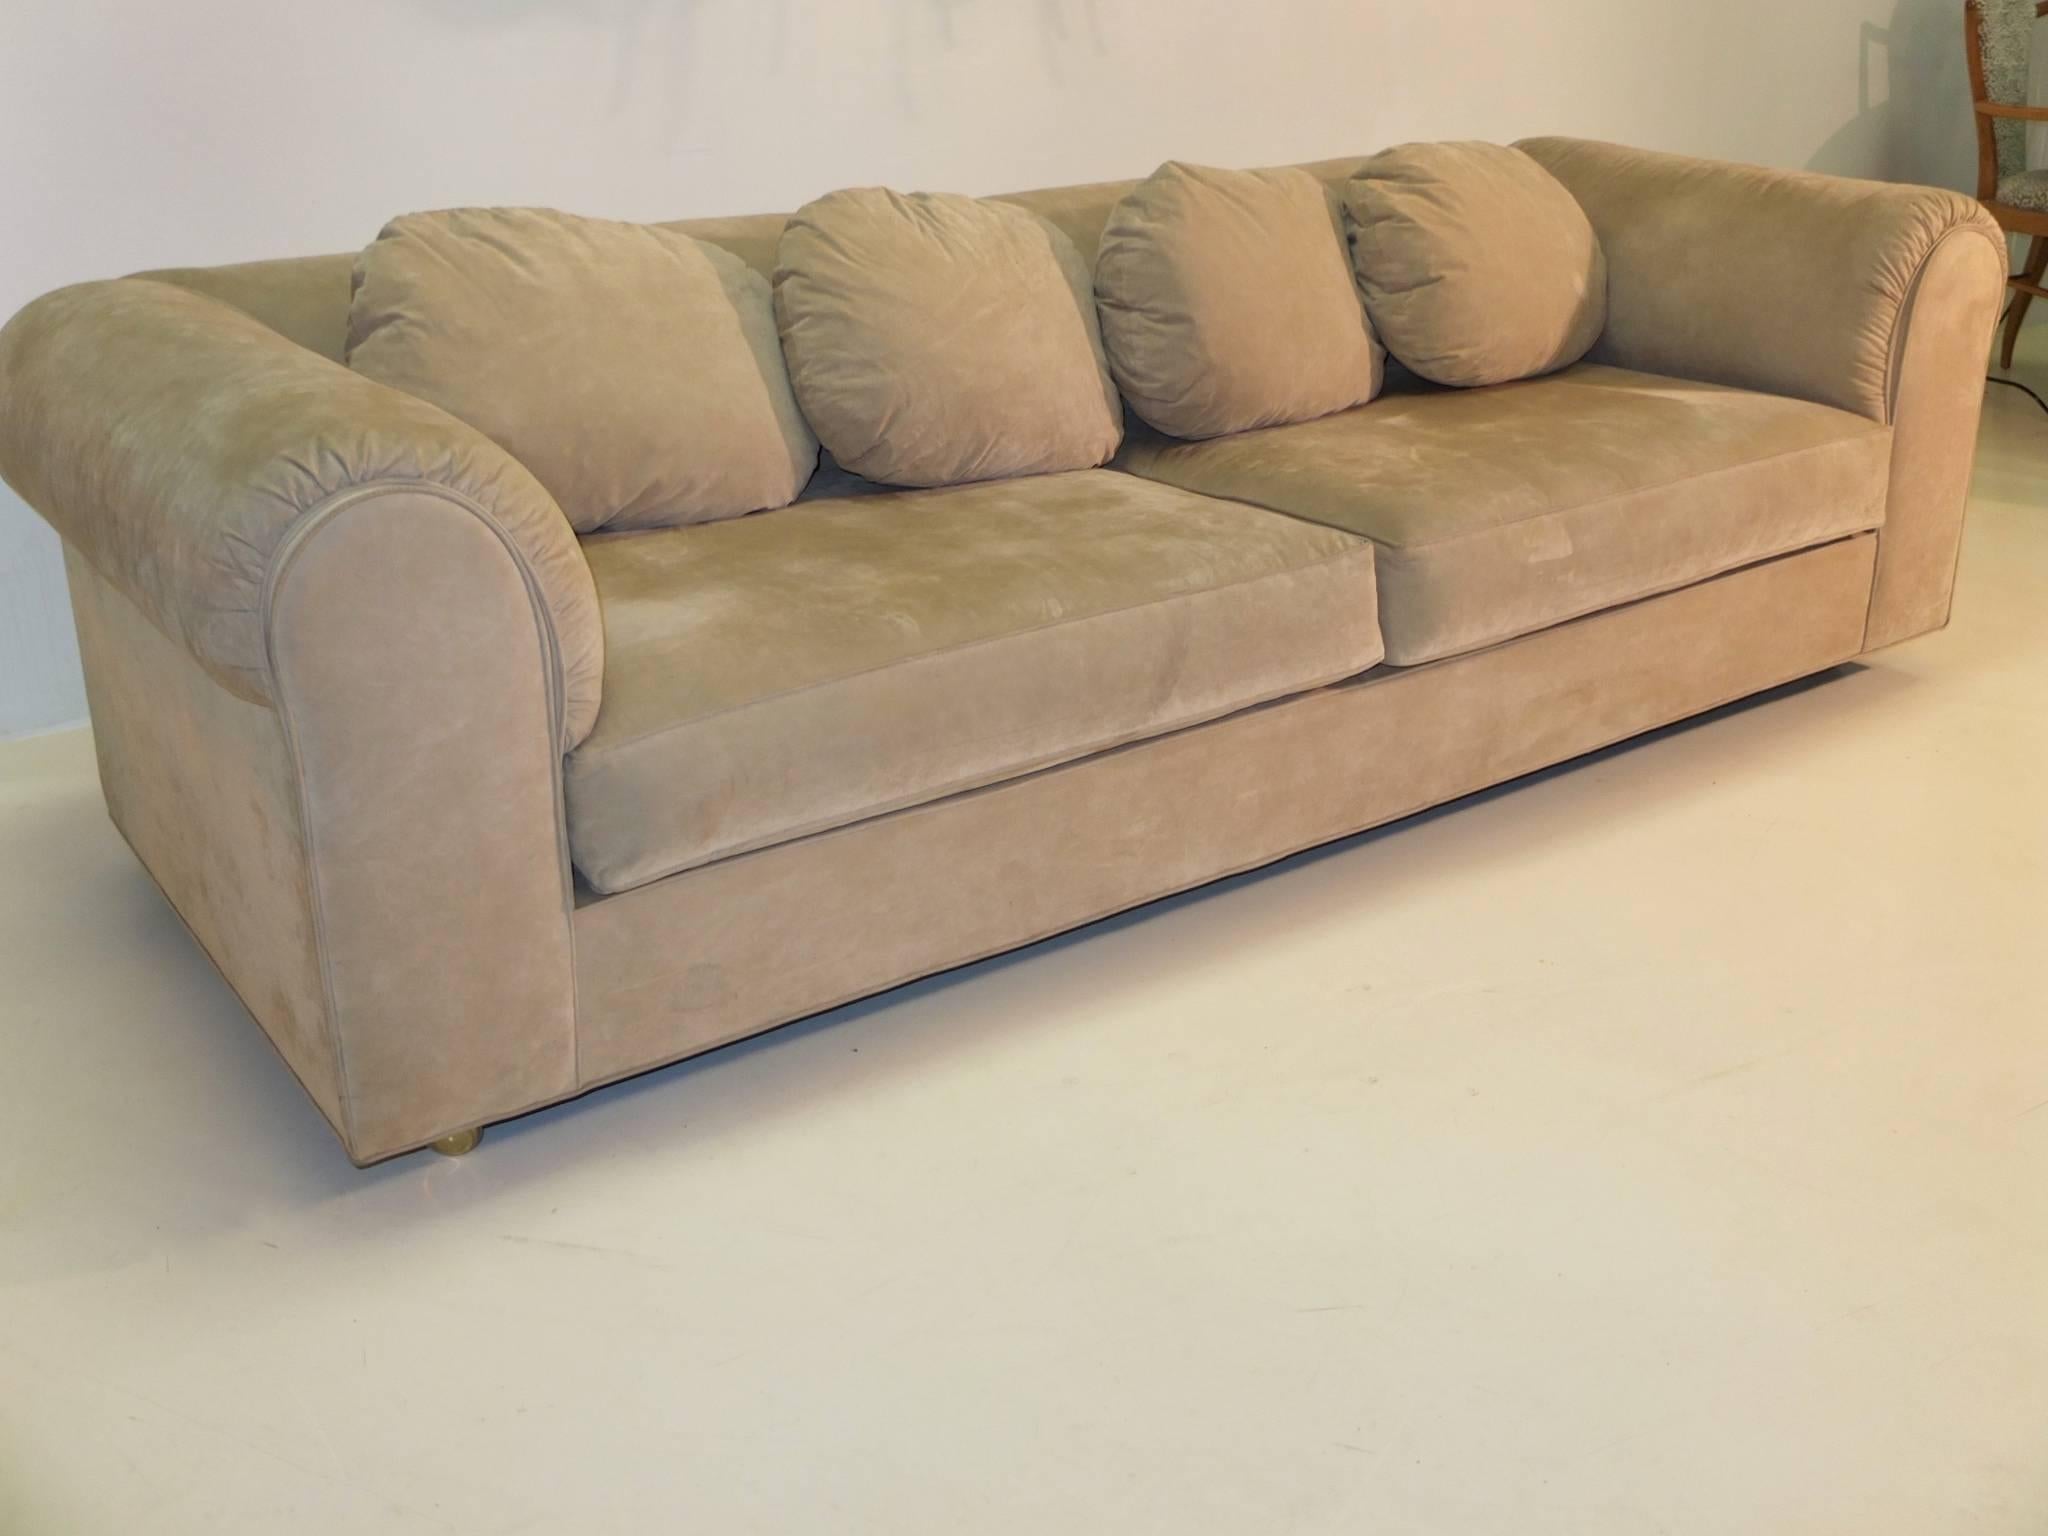 SATURDAY SALE (2/18)

A Dunbar upholstered sofa having a suede upholstered back, arms and seat, raised on brass casters. Dunbar printed decking.  Paper label from W & J Sloane.

The 7150 Harlow Lounge Sofa was designed by Edward Wormley for Dunbar